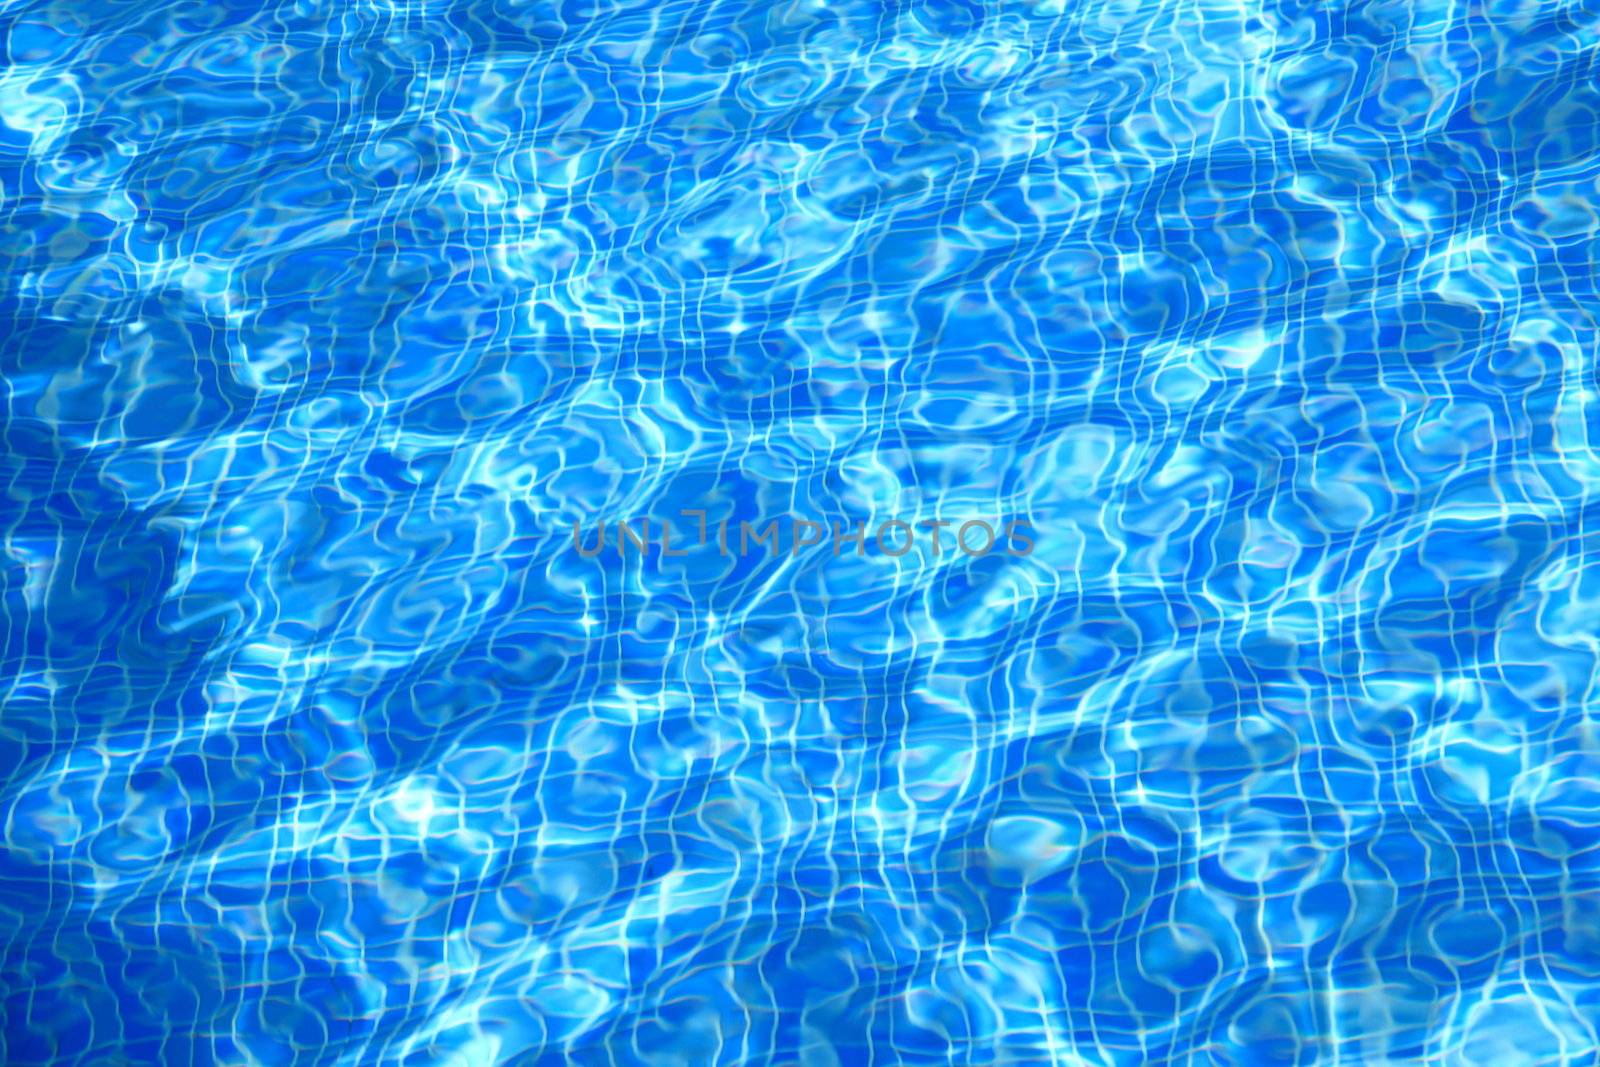 Pool water - blue background texture by Maridav